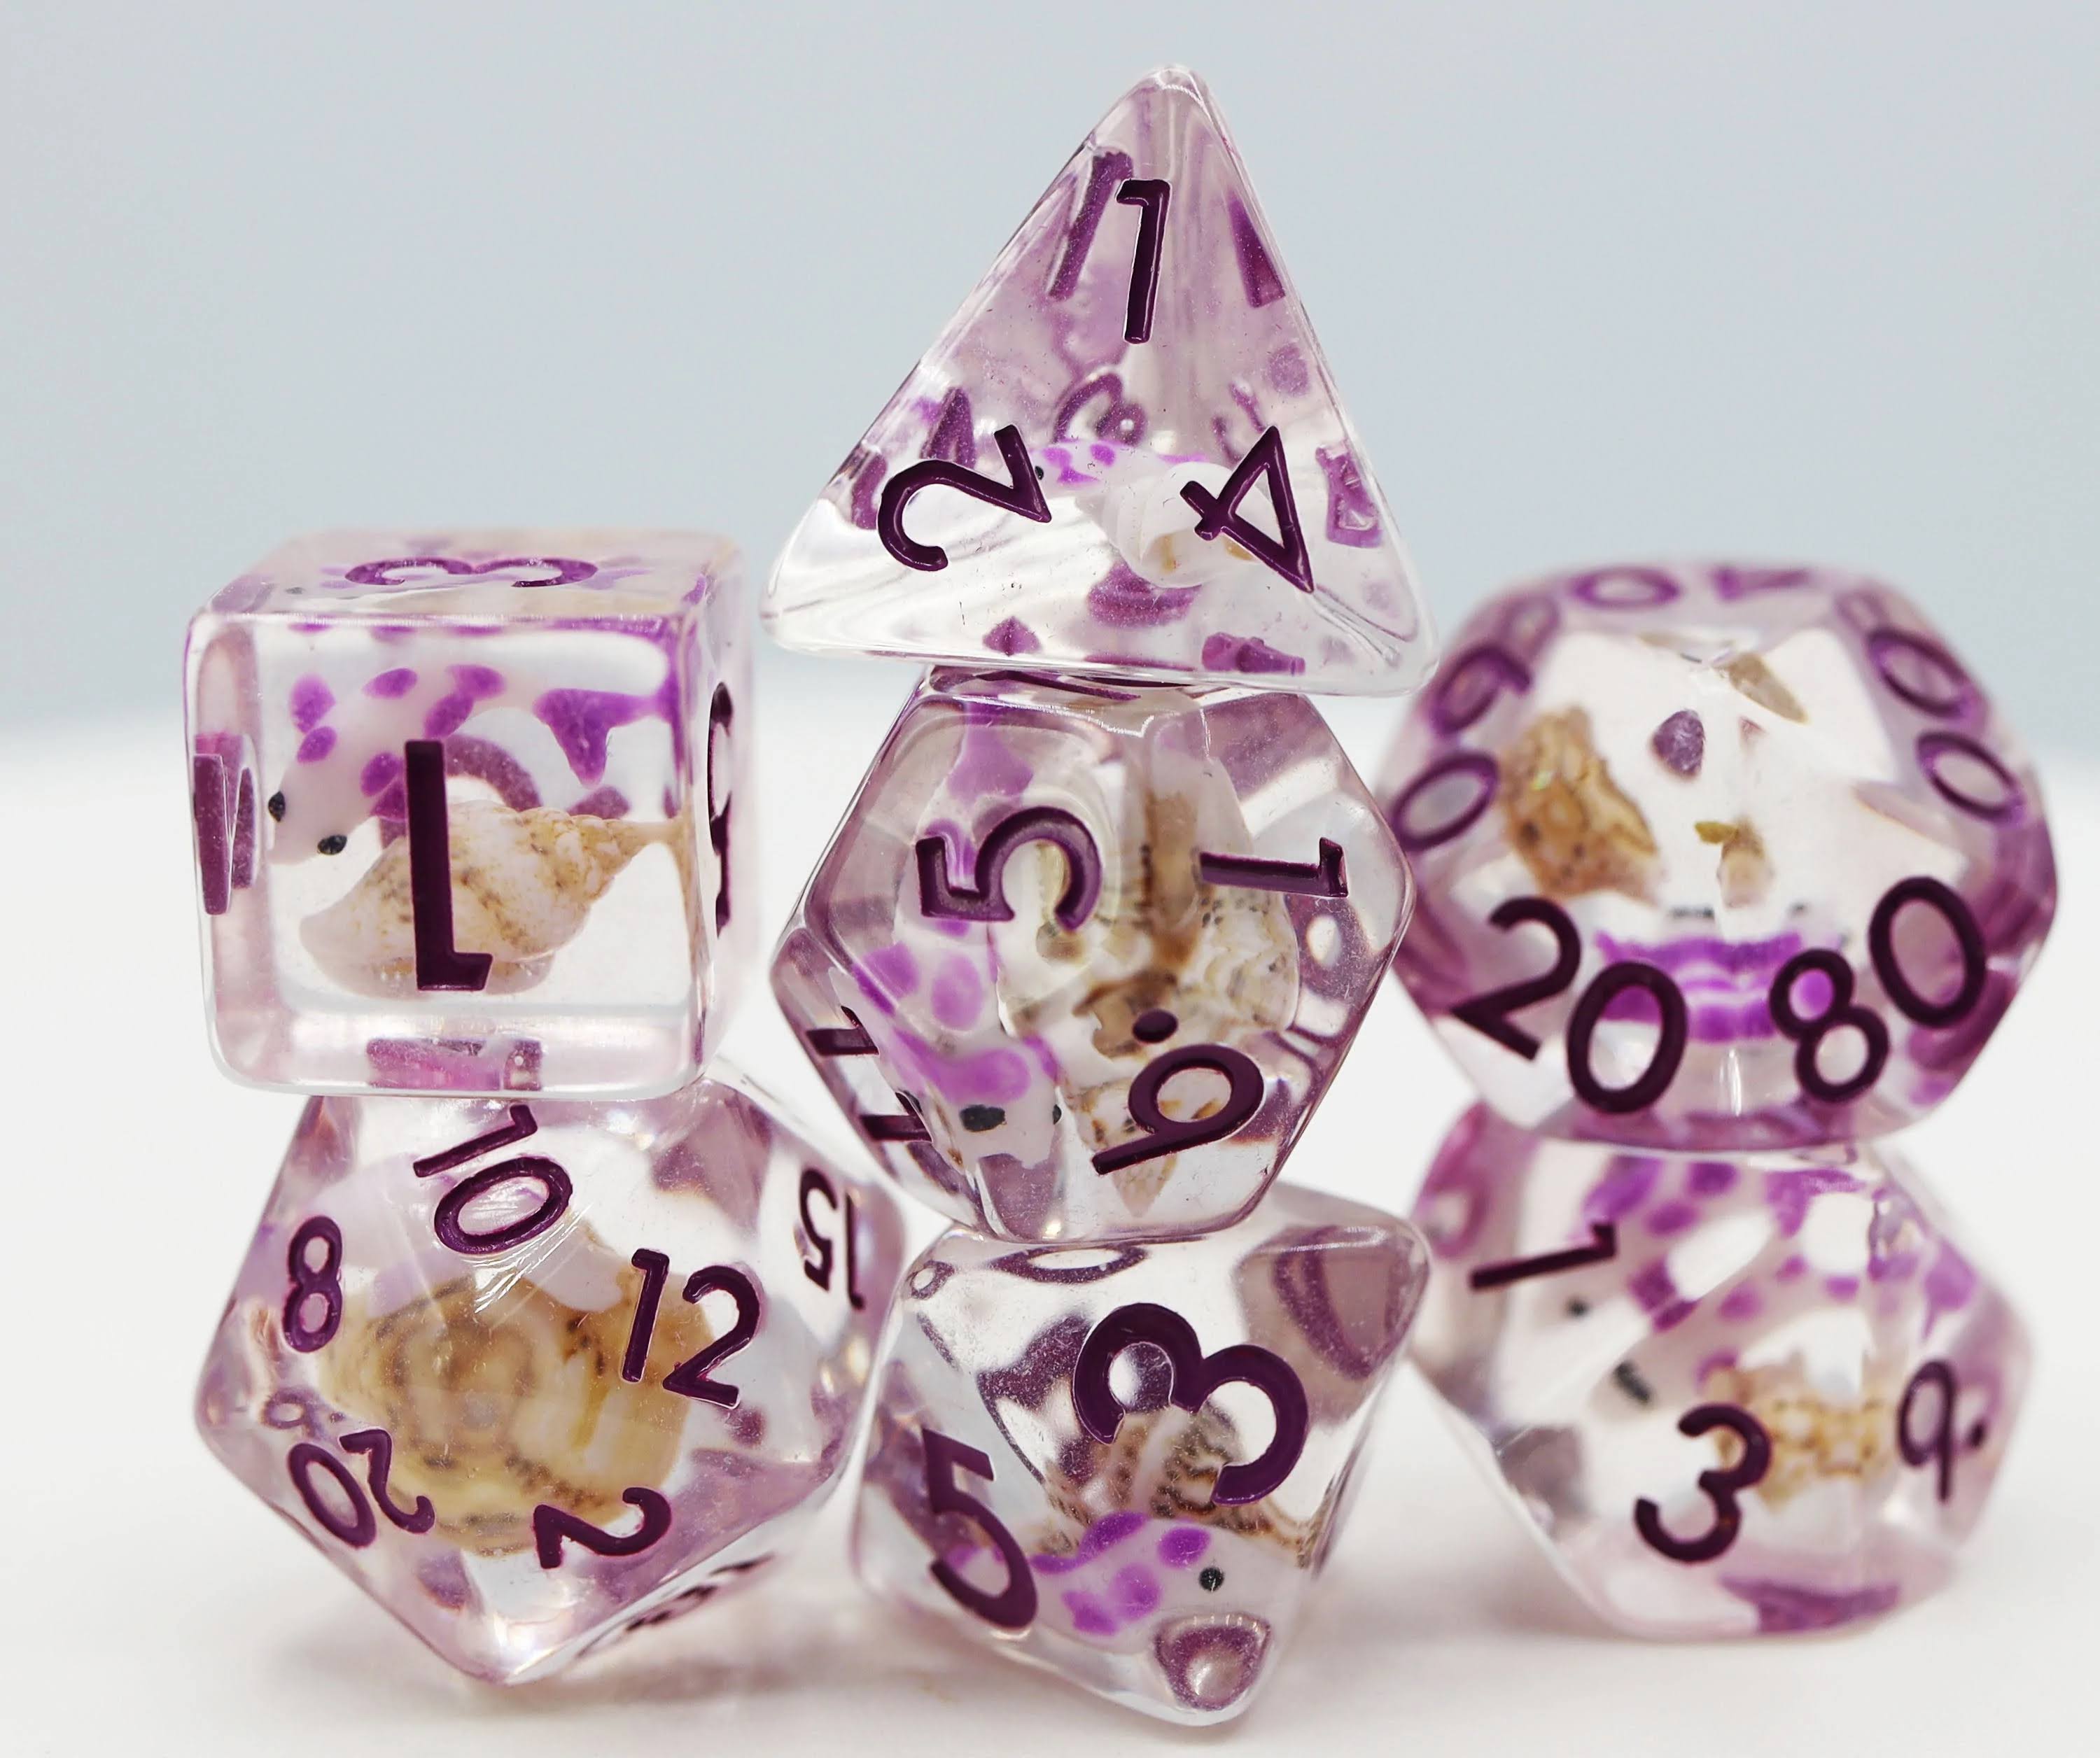 Dice and Gaming Accessories Polyhedral RPG Sets Stuff-Inside Purple Koi (7)